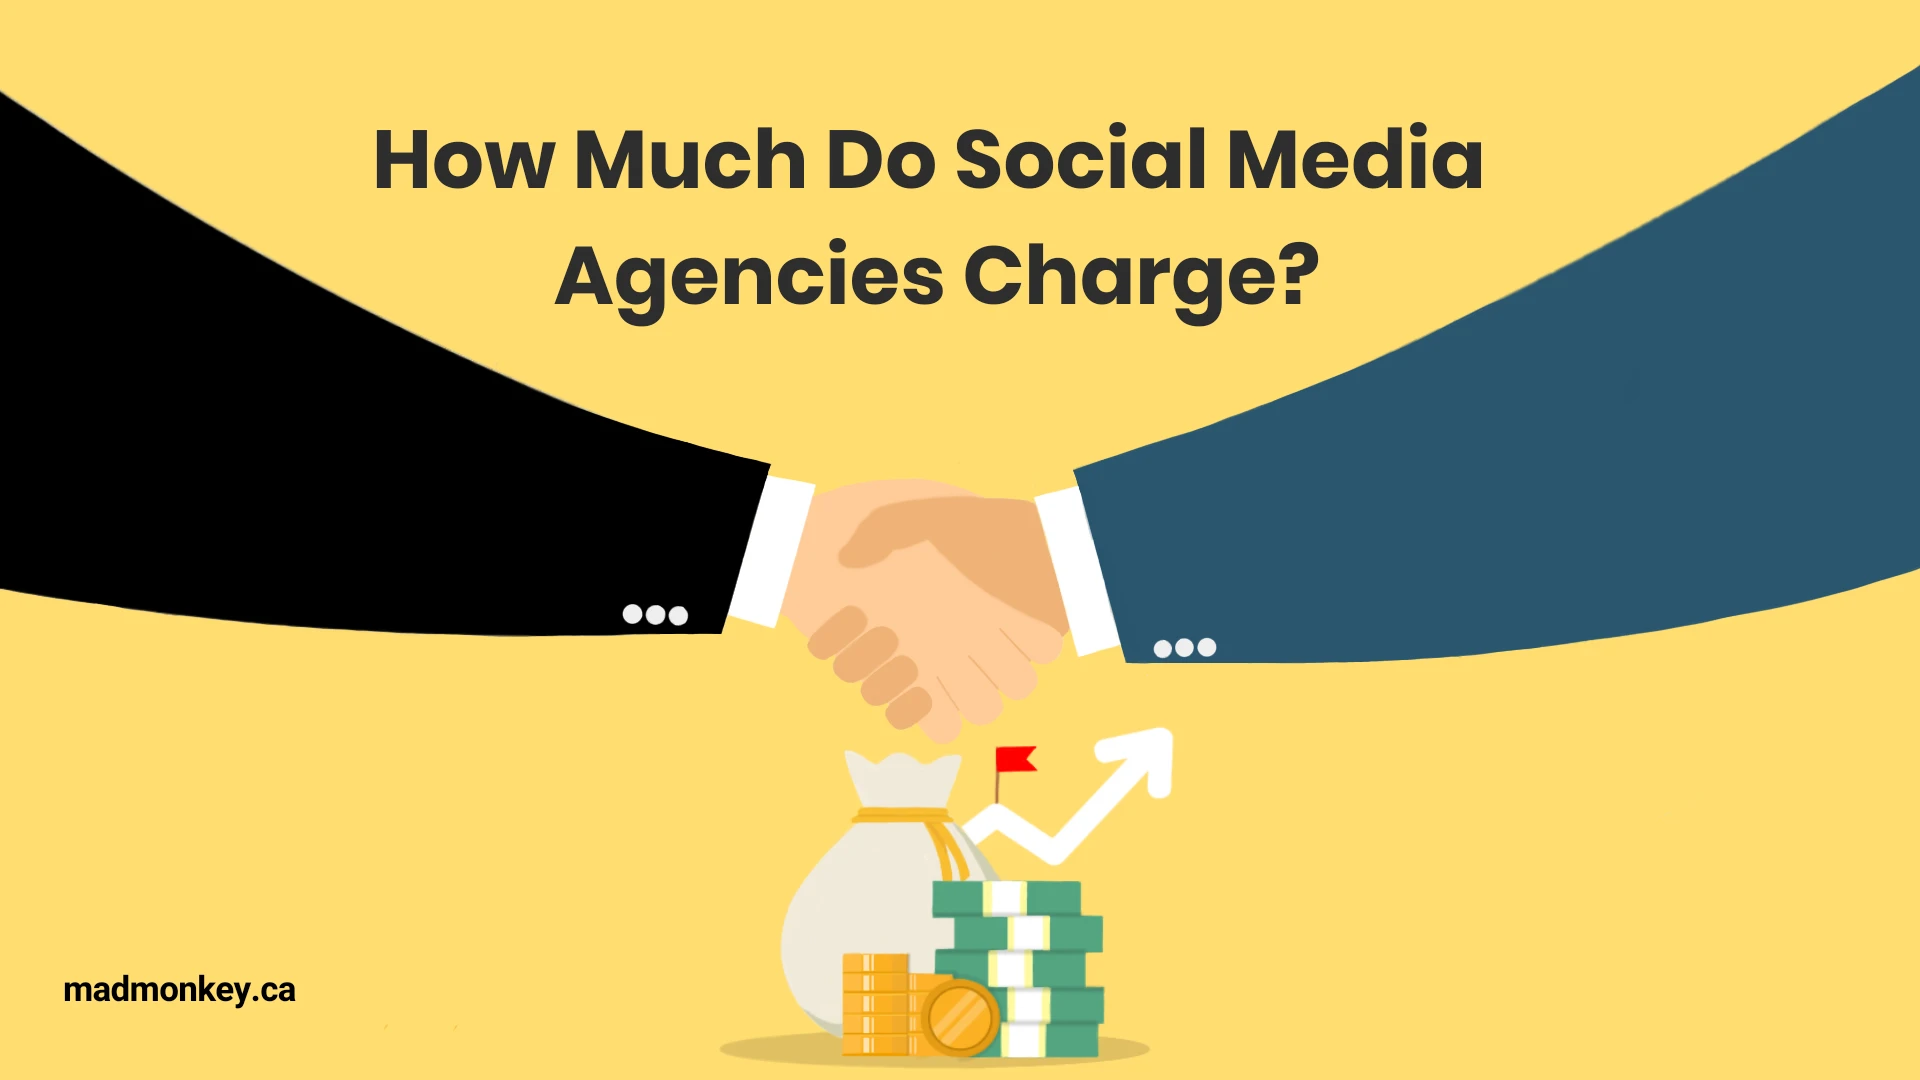 How Much Do Social Media Agencies Typically Charge?